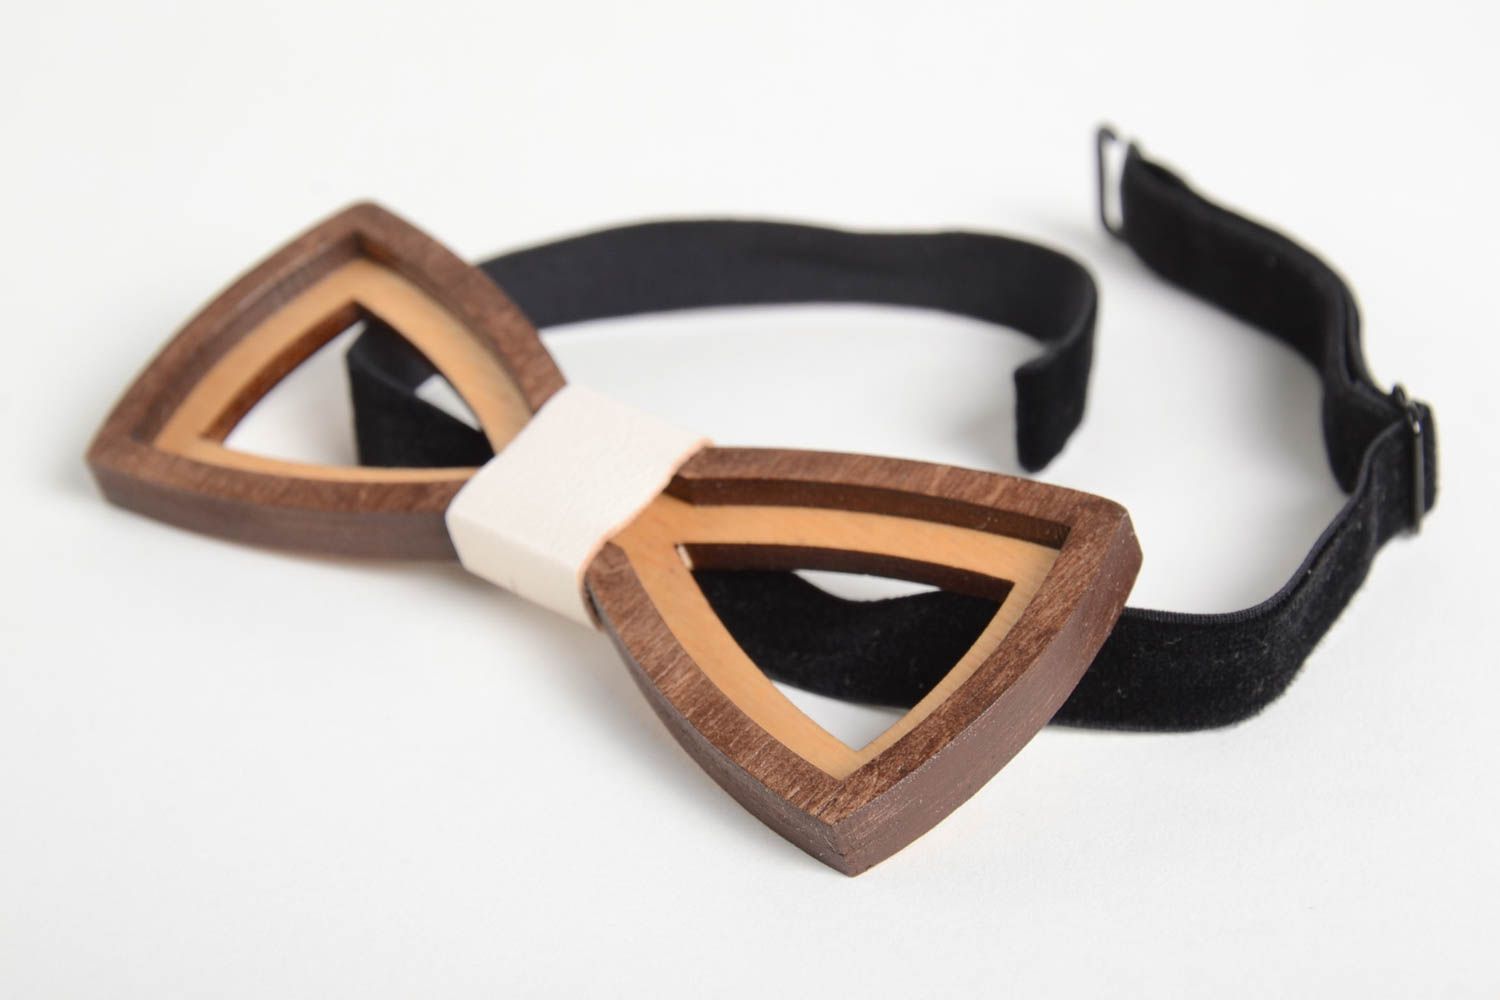 Handmade bow tie wooden bow tie accessories for men wooden gifts unique gifts photo 5